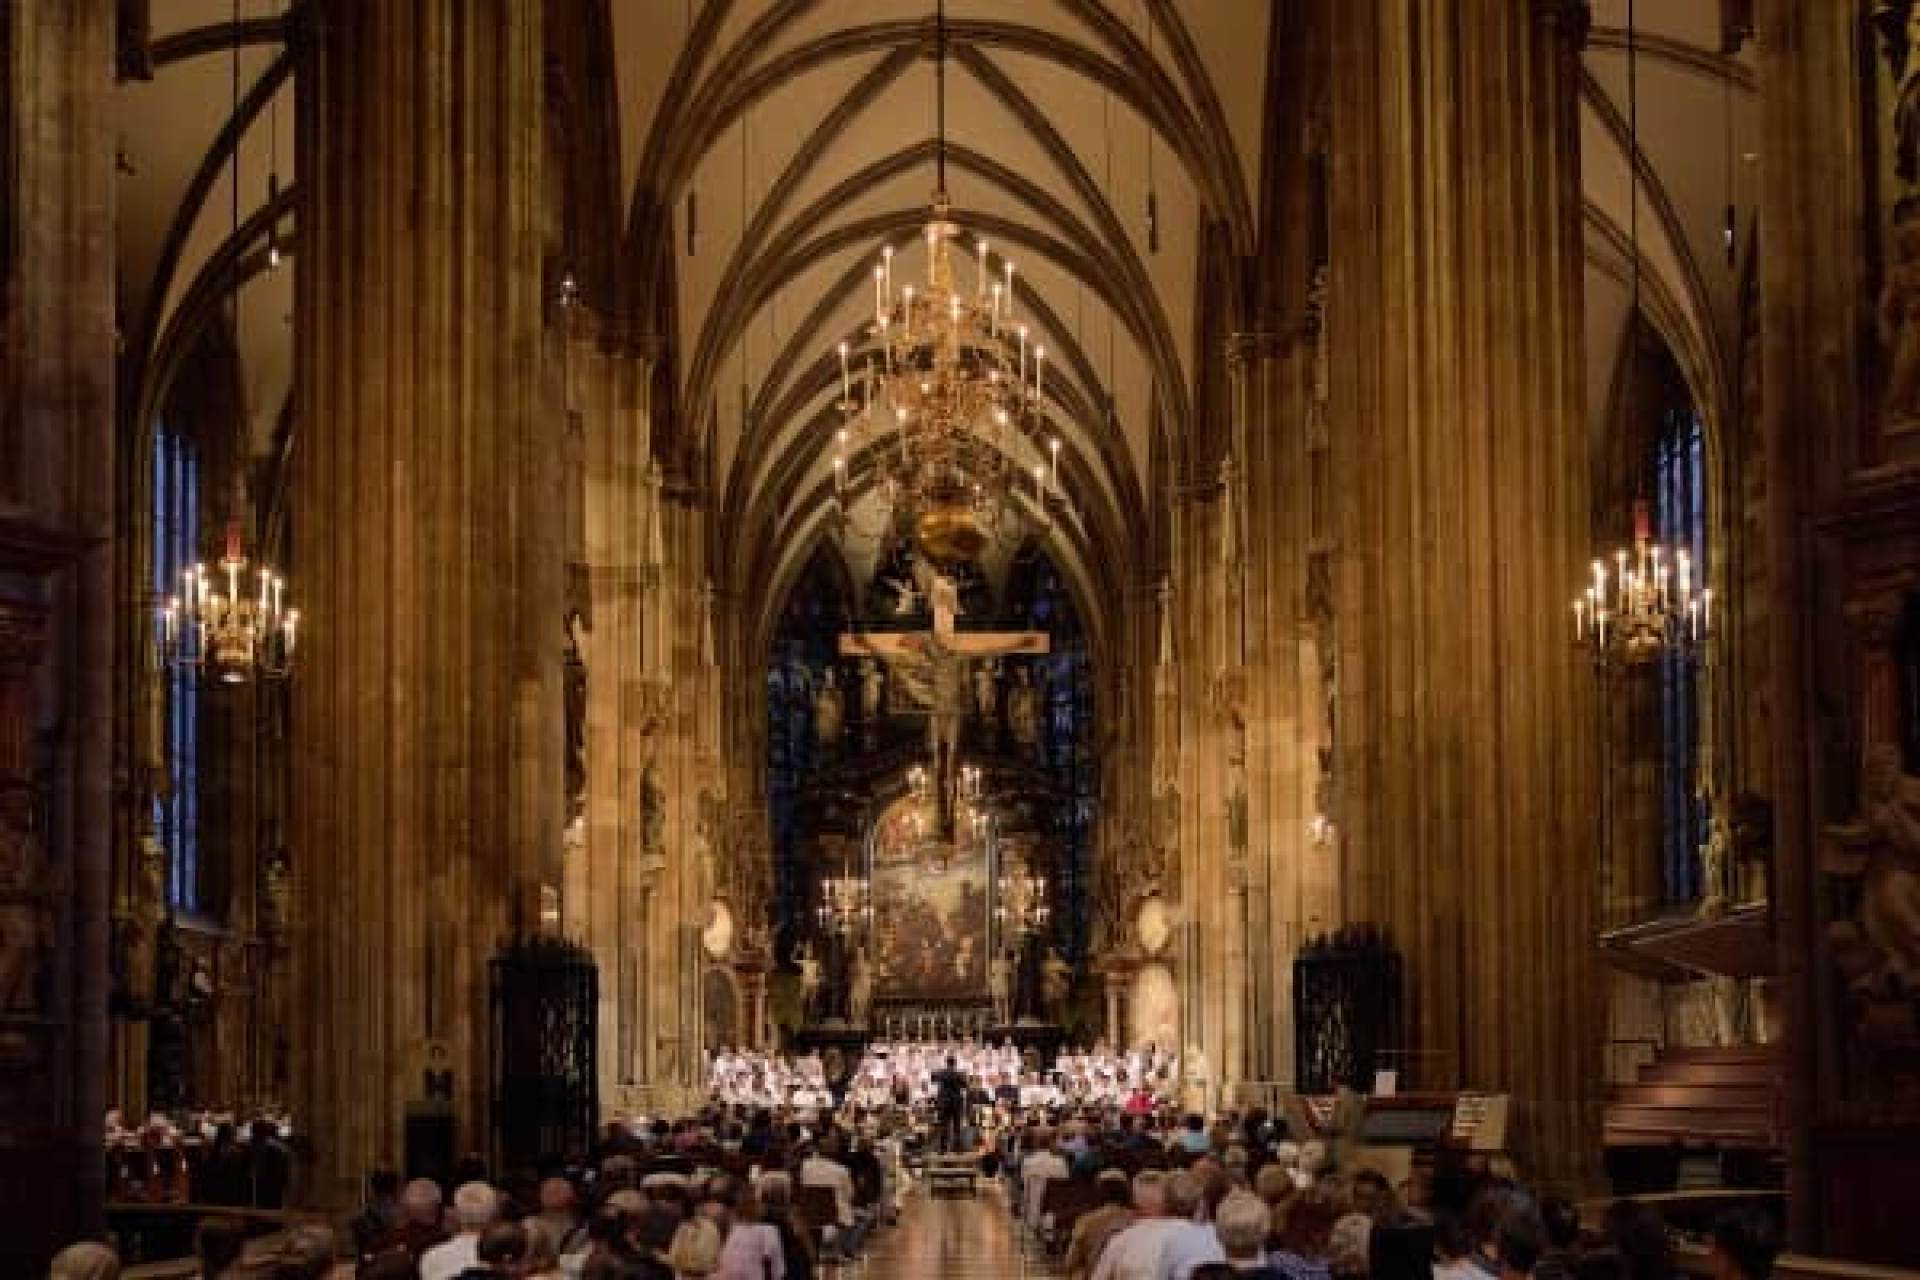 C. Saint-Saëns, Christmas Oratorio at St. Stephen’s Cathedral